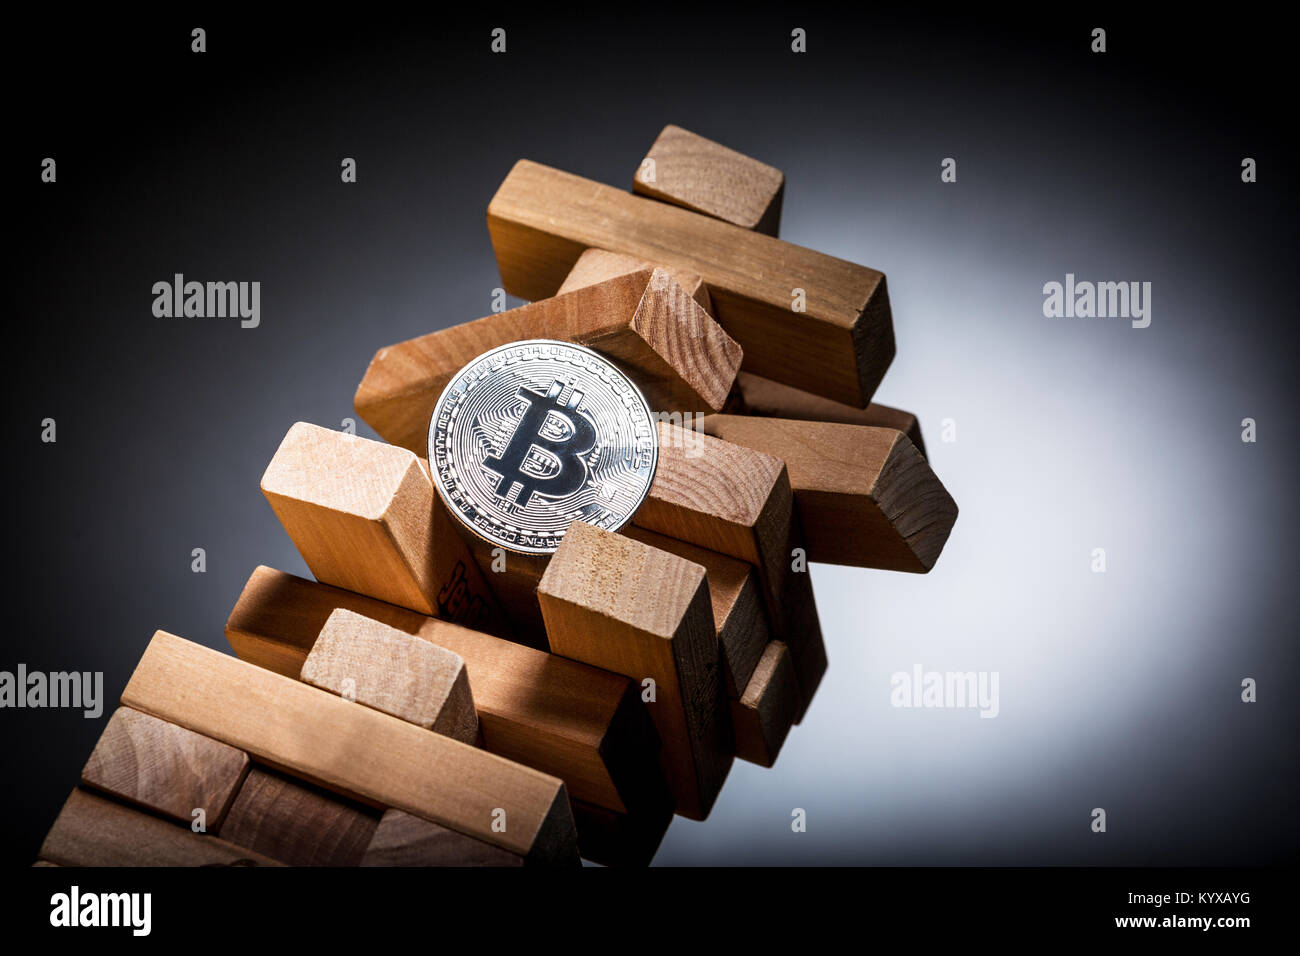 Bitcoin investment risk concept image Stock Photo